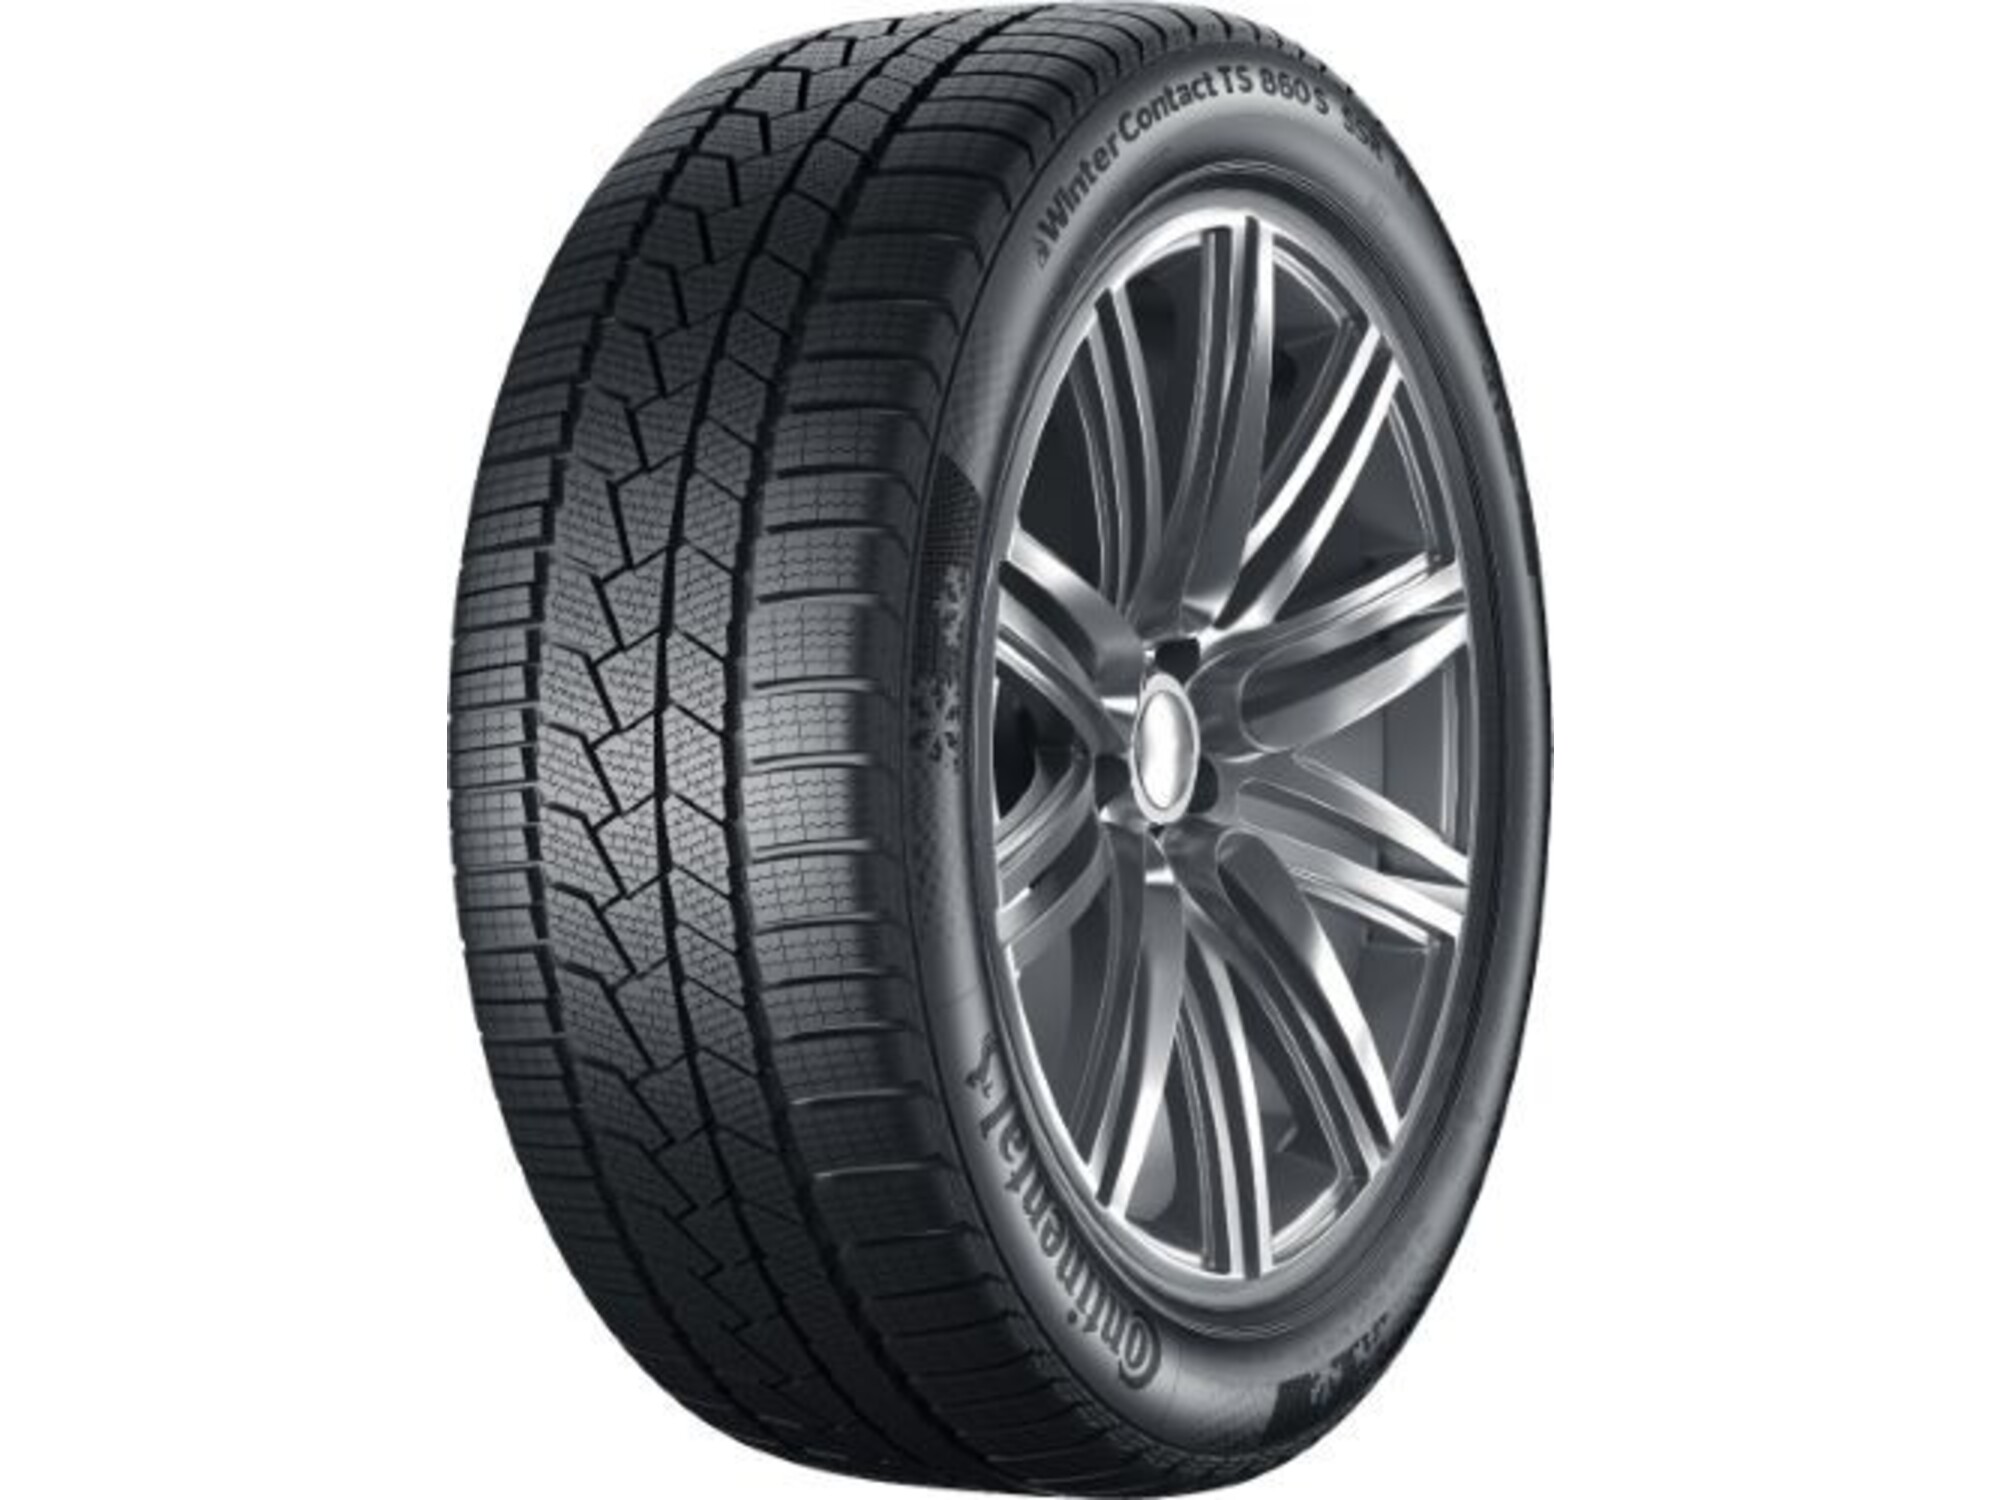 CONTINENTAL zimske gume 225/40R19 93V XL FR 3PMSF WinterContact TS860S m+s Continental